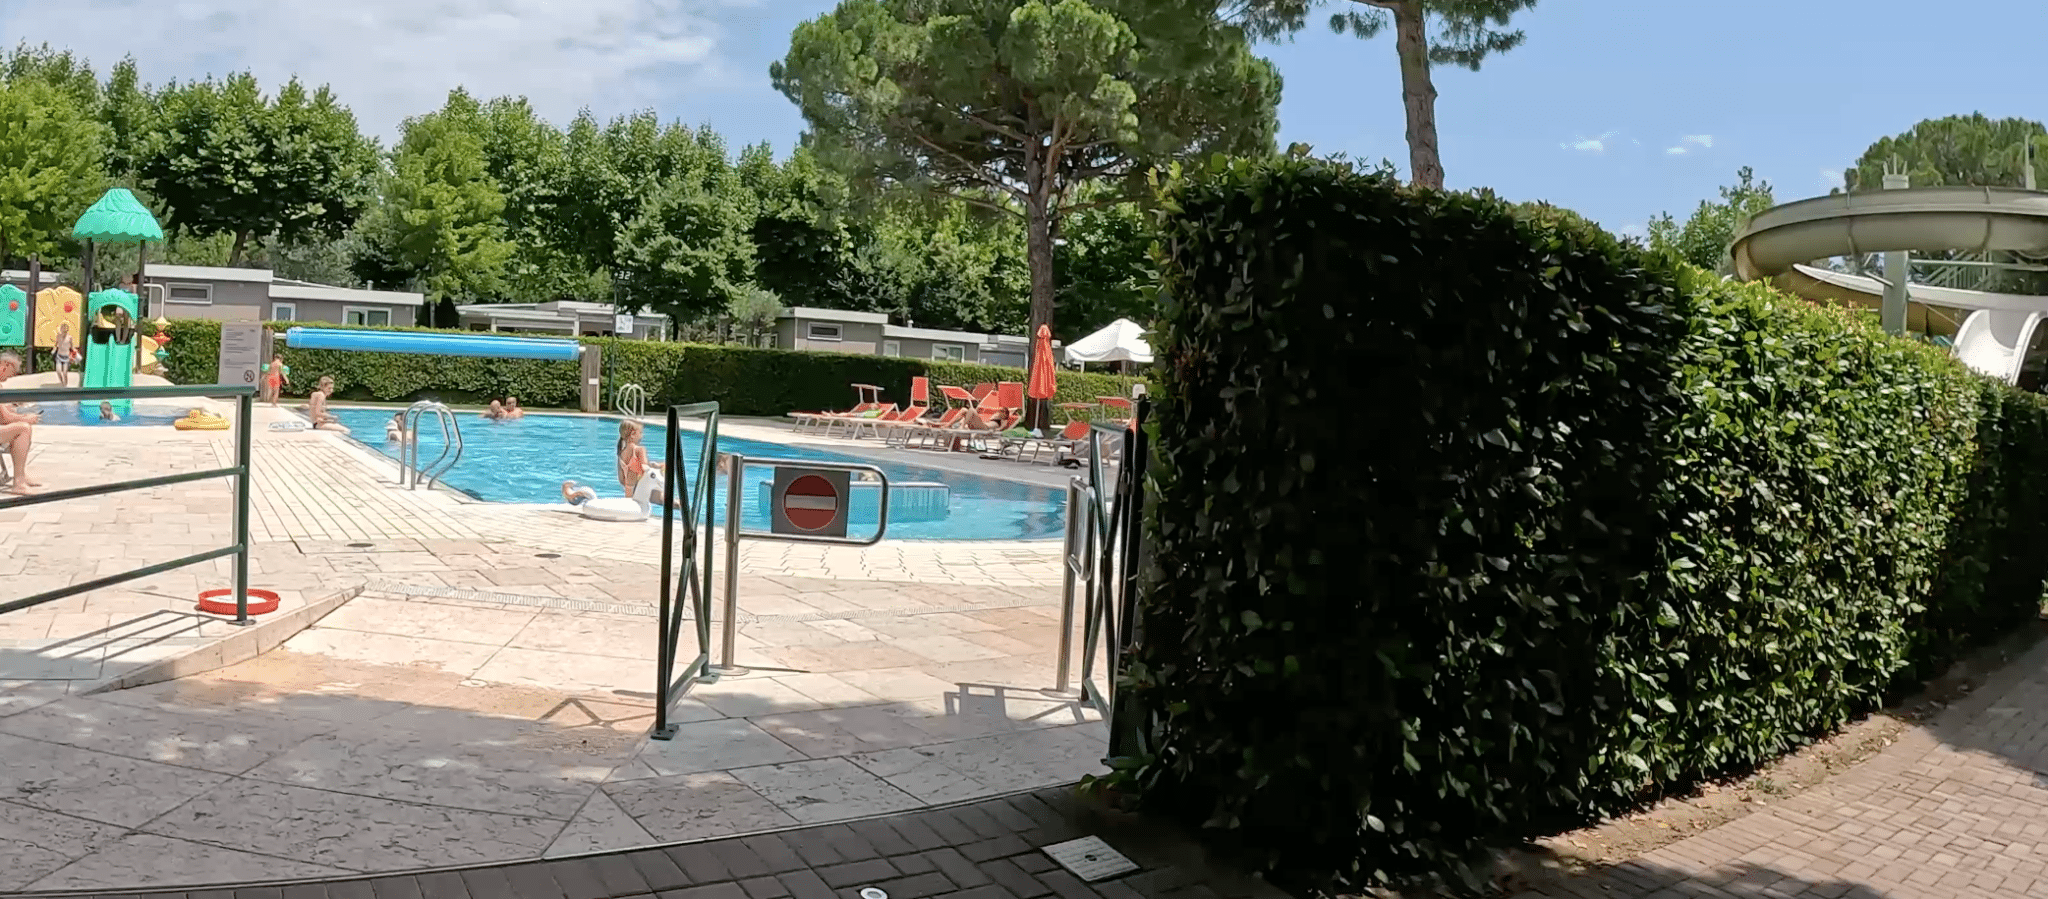 Schwimmbad Italy Camping Village